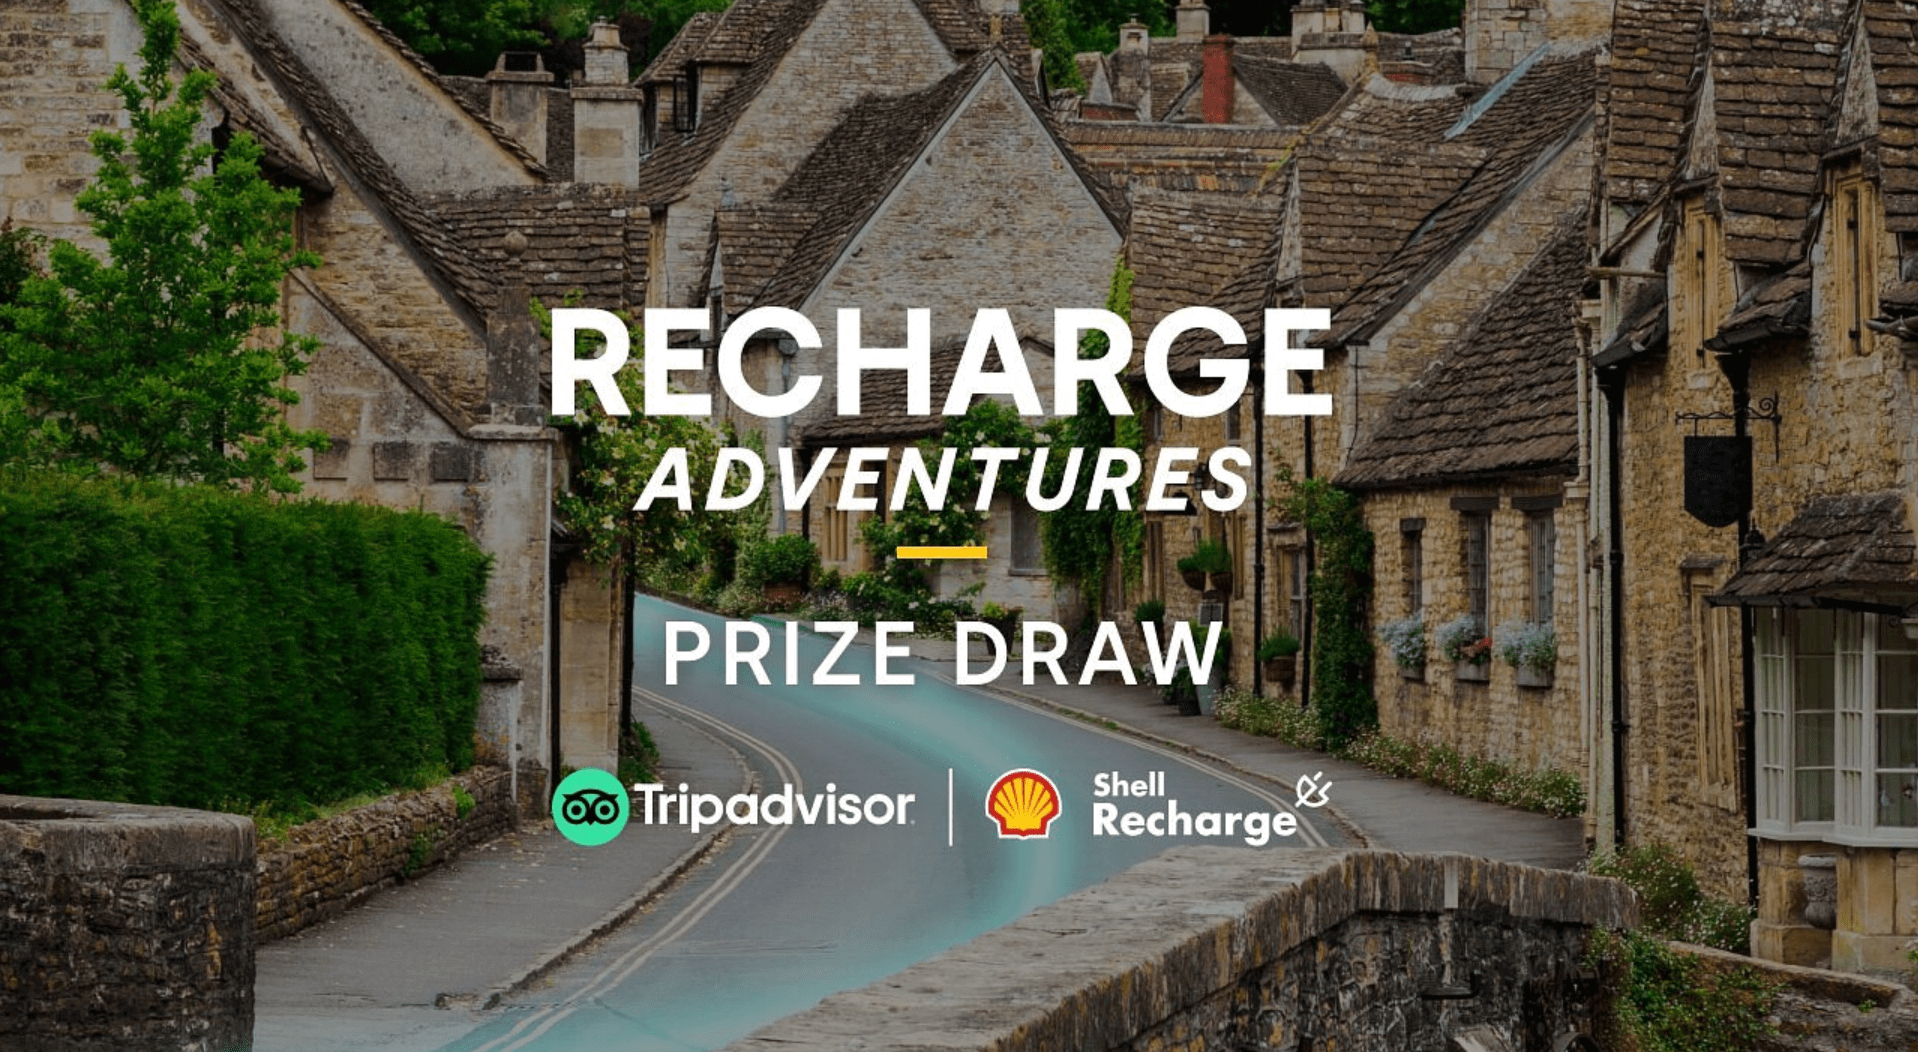 Win an electric vehicle road trip with Shell Recharge and Tripadvisor